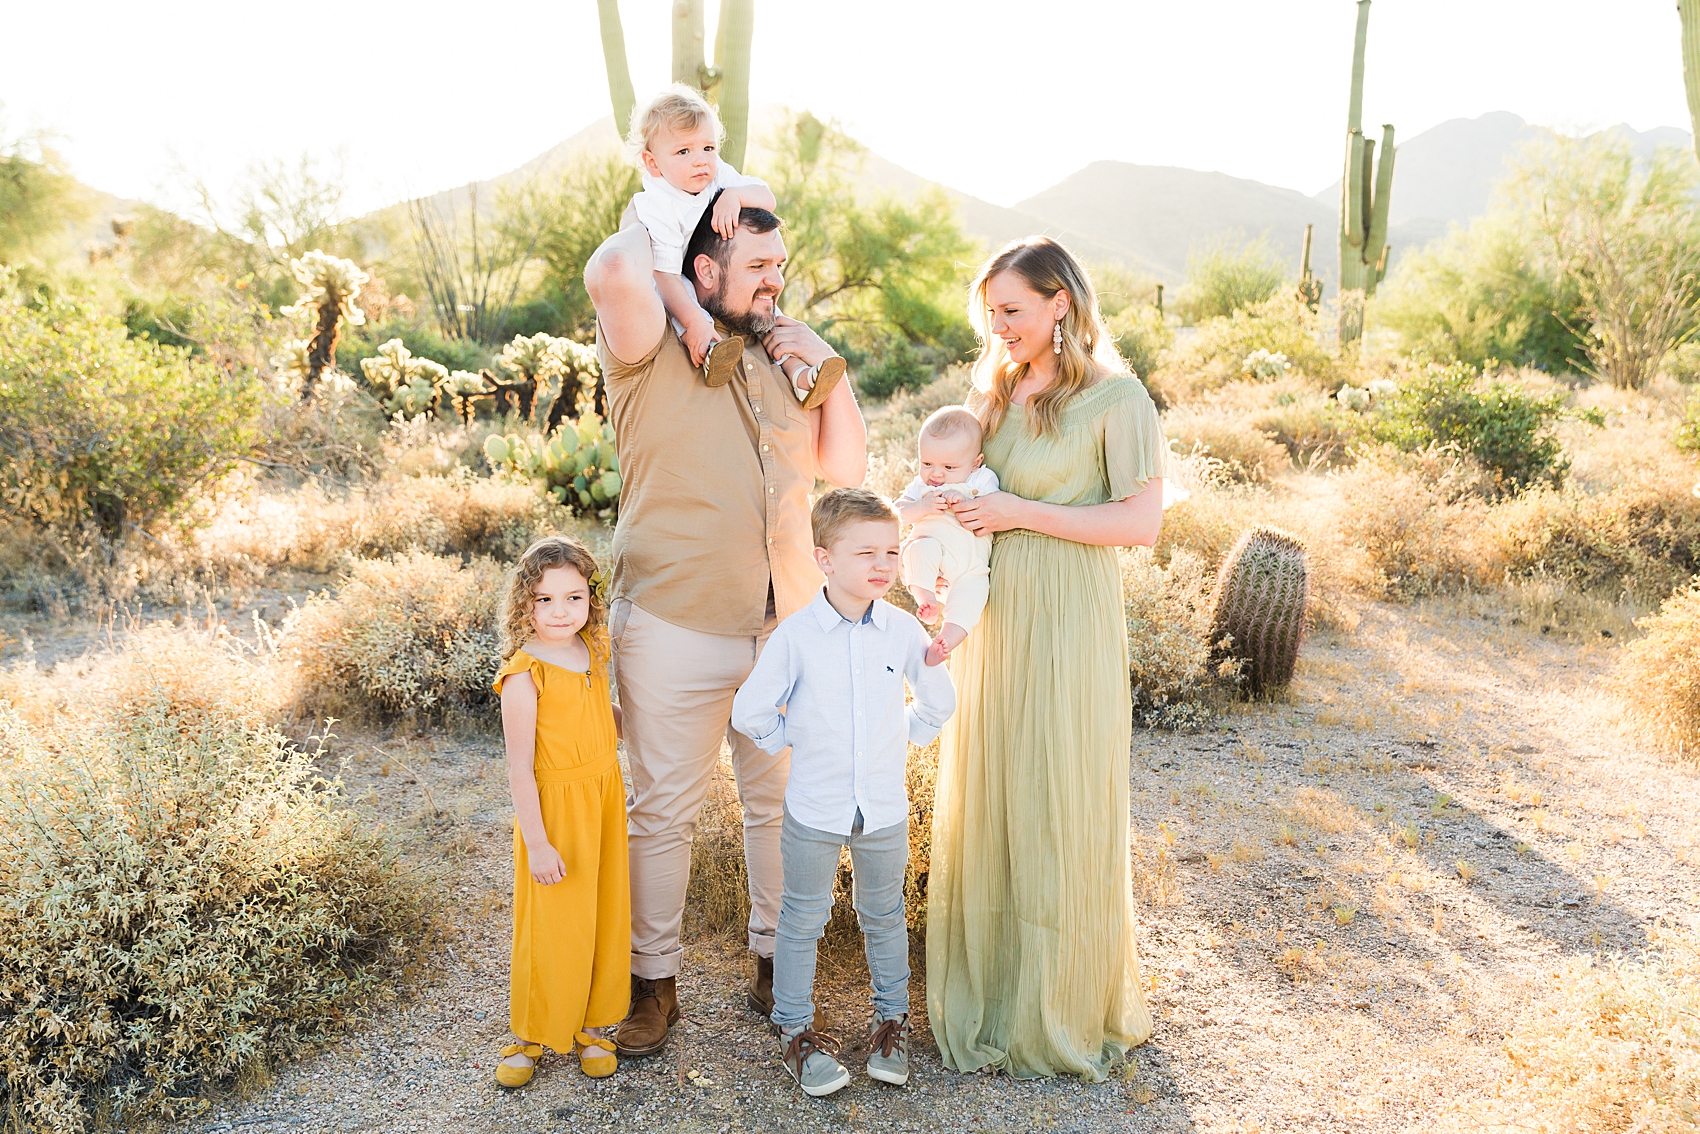 Leah Hope Photography | Scottsdale Phoenix Arizona | Desert Landscape Cactus Mountains Scenery | Sunrise Natural Light | What to Wear | How to Pose | Family Poses | Styling Fashion for Pictures | Family Photos 